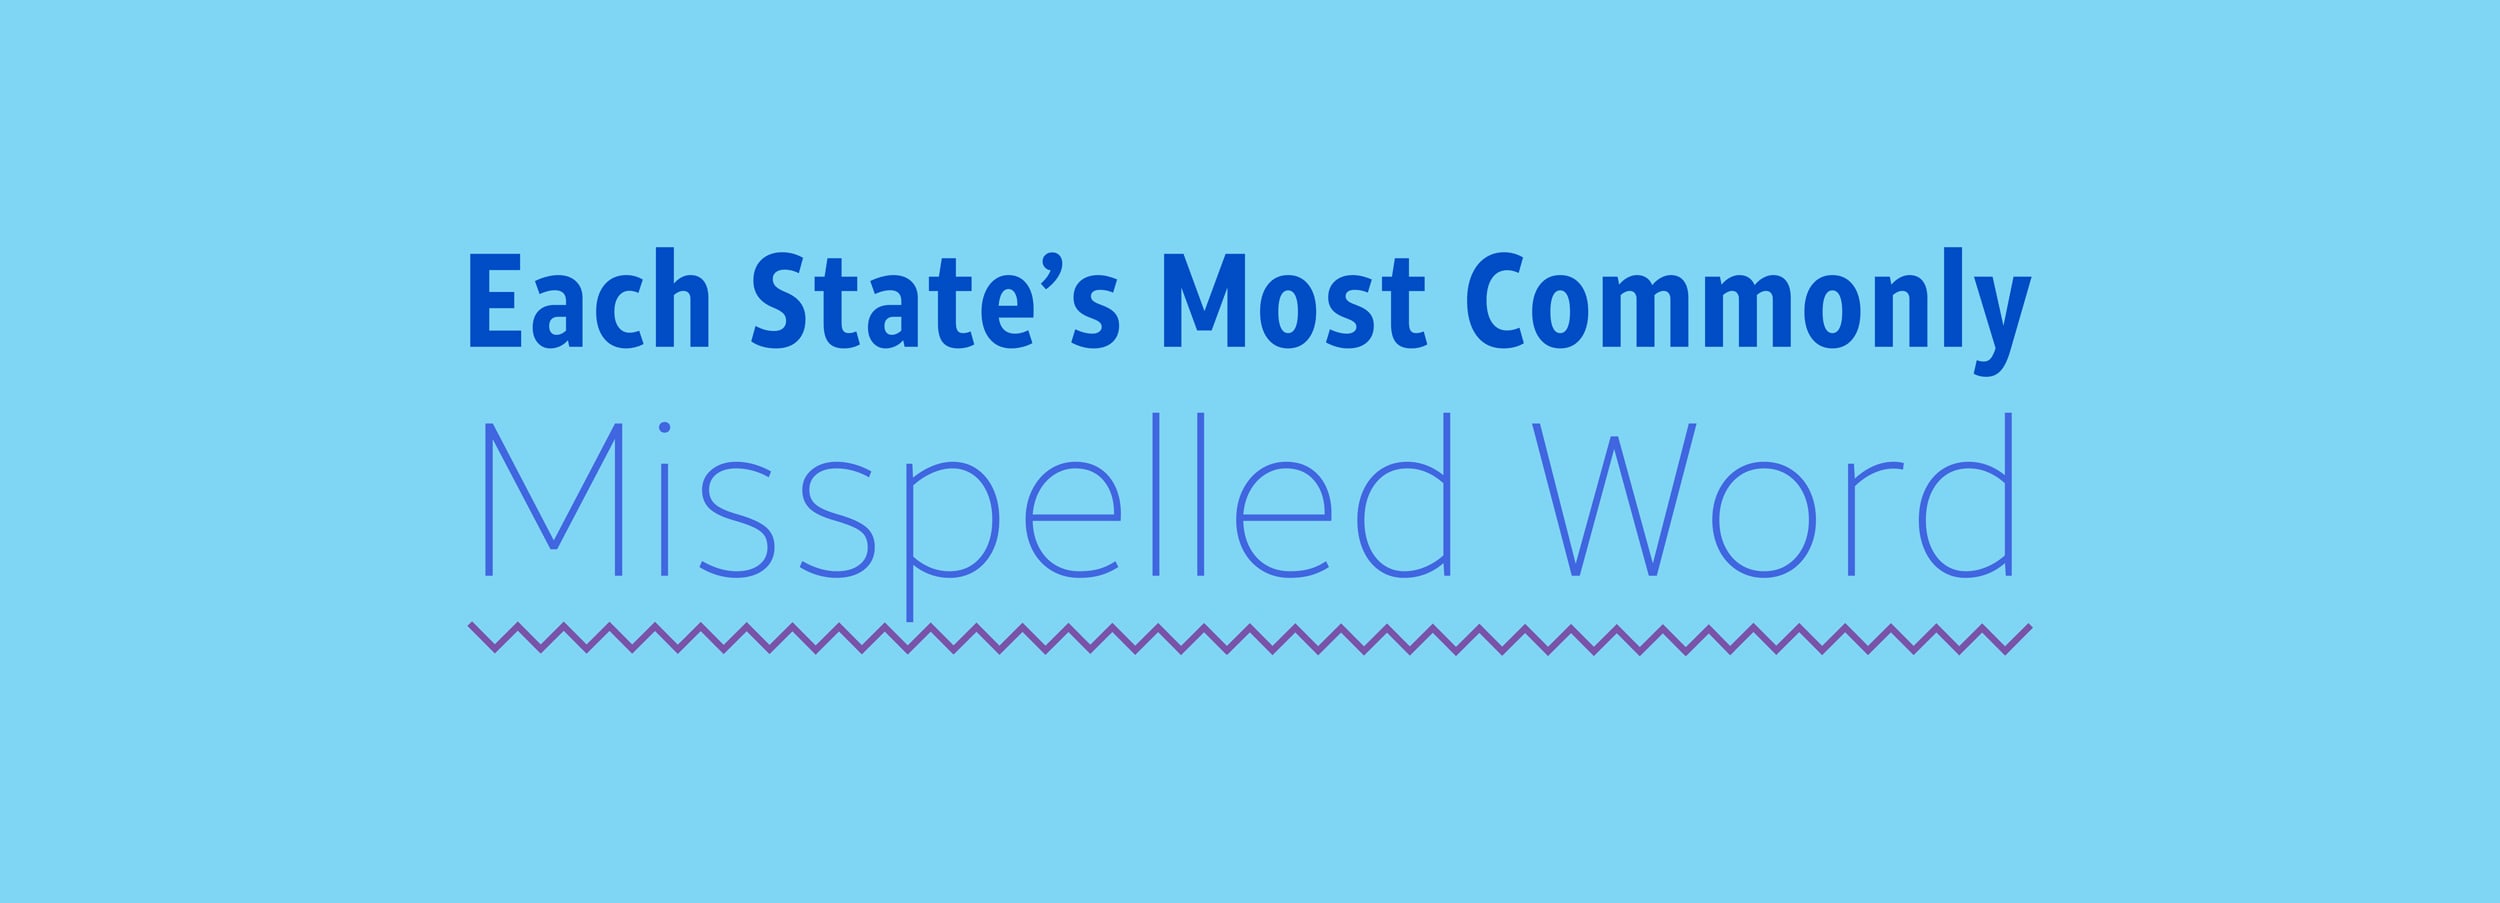 Each states most commonly misspelled word